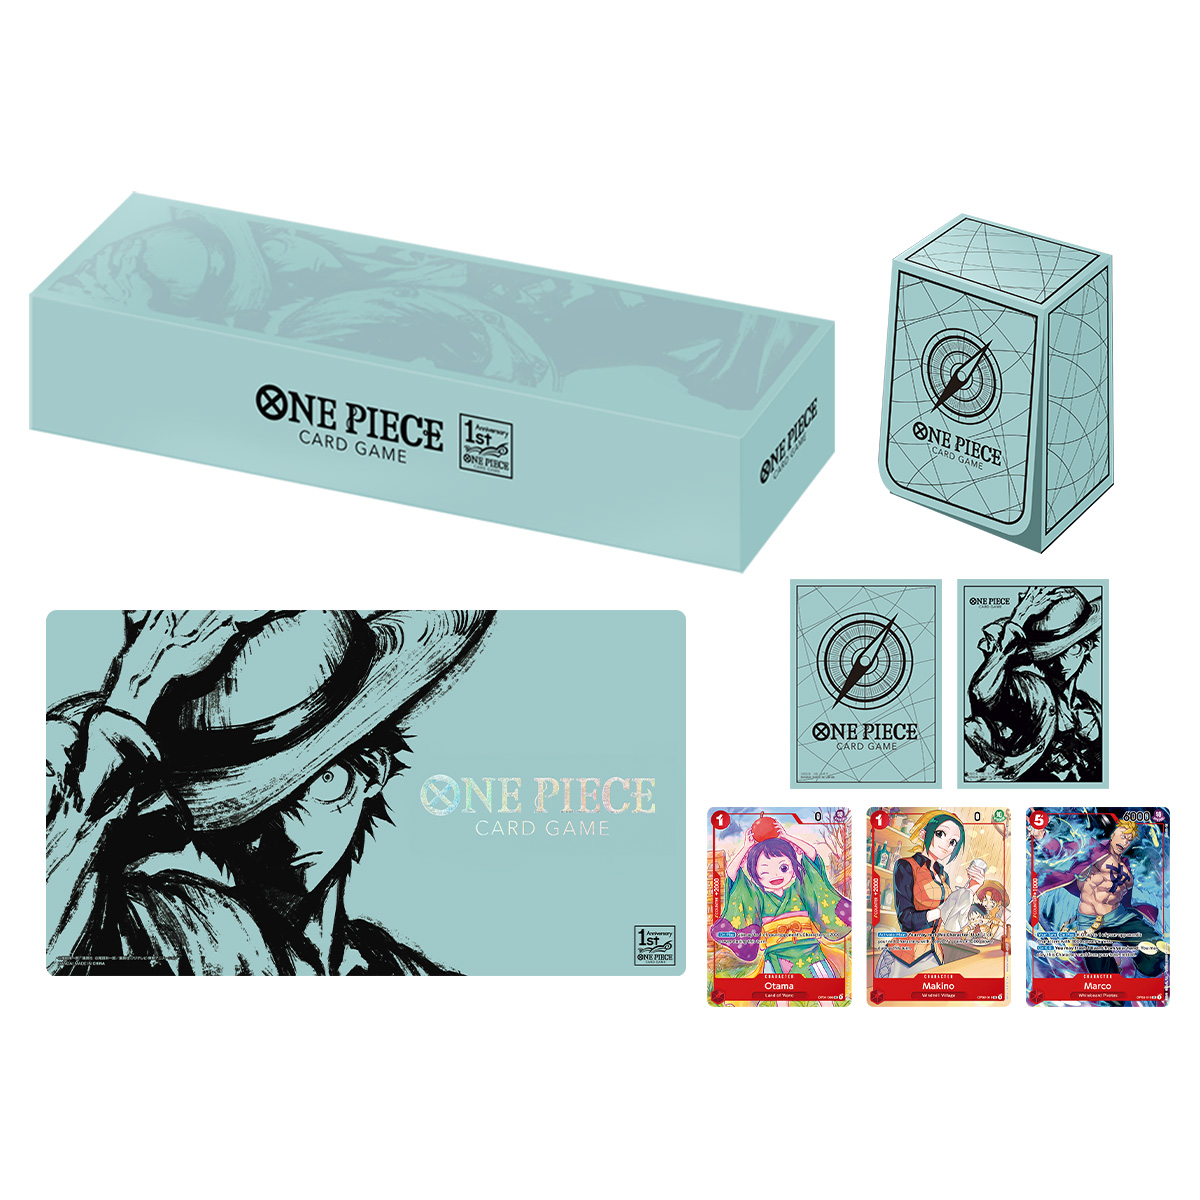 ONE PIECE CARD GAME Japanese 1st Anniversary Set | ONE PIECE ...